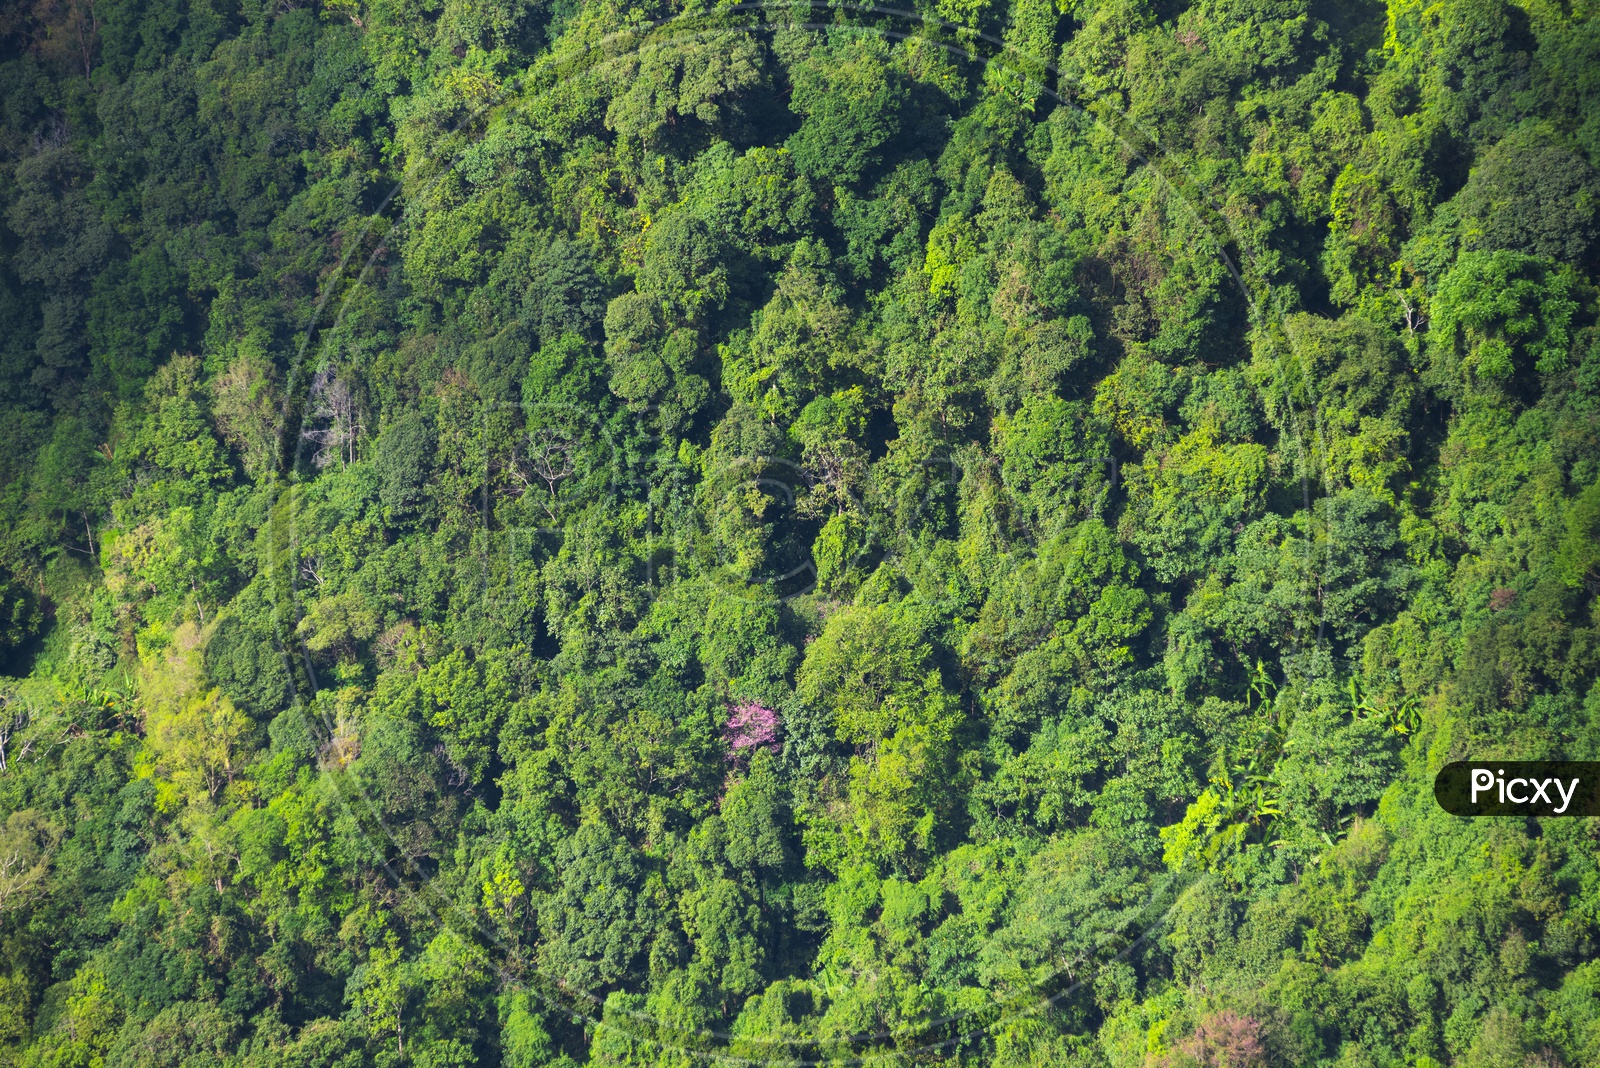 Mountains, Trees, and greenery in a deep forest Ariel view